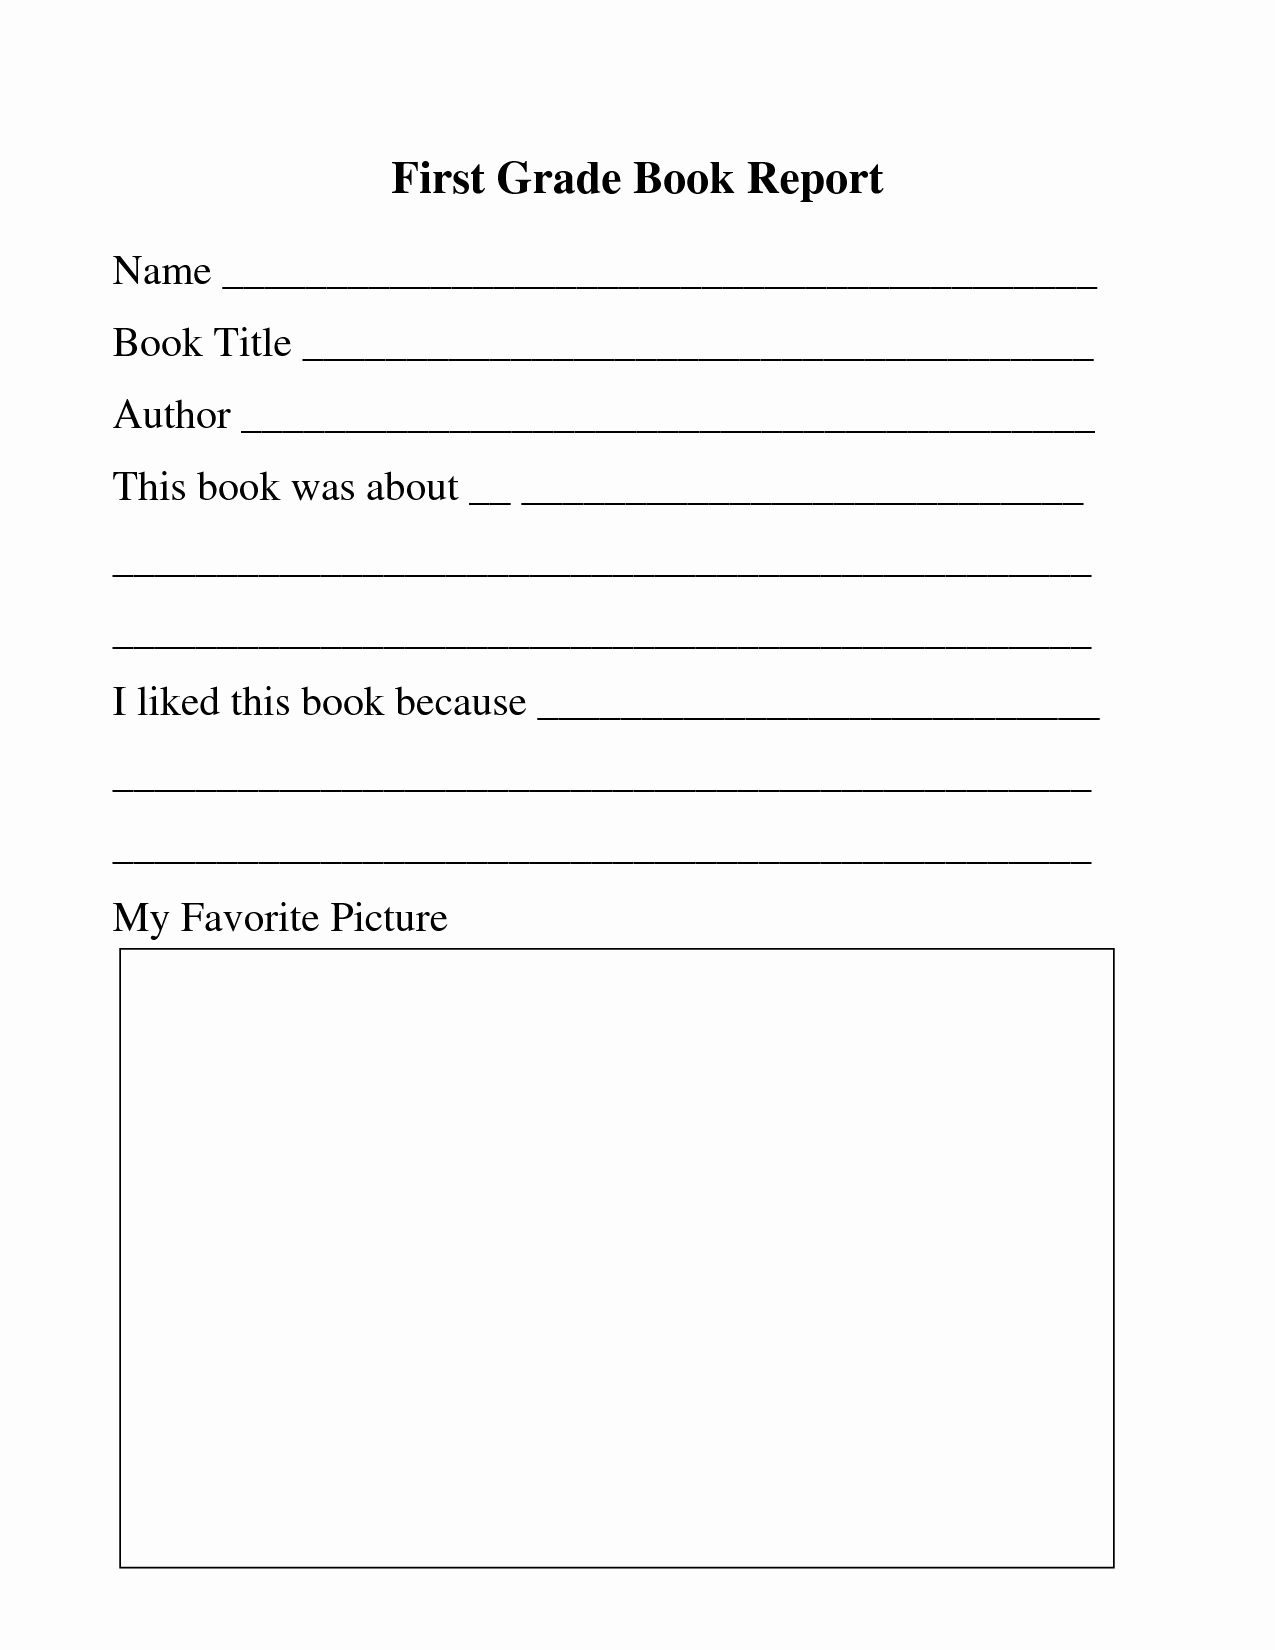 Printable Book Template Or First Grade Book Review Printable Within First Grade Book Report Template